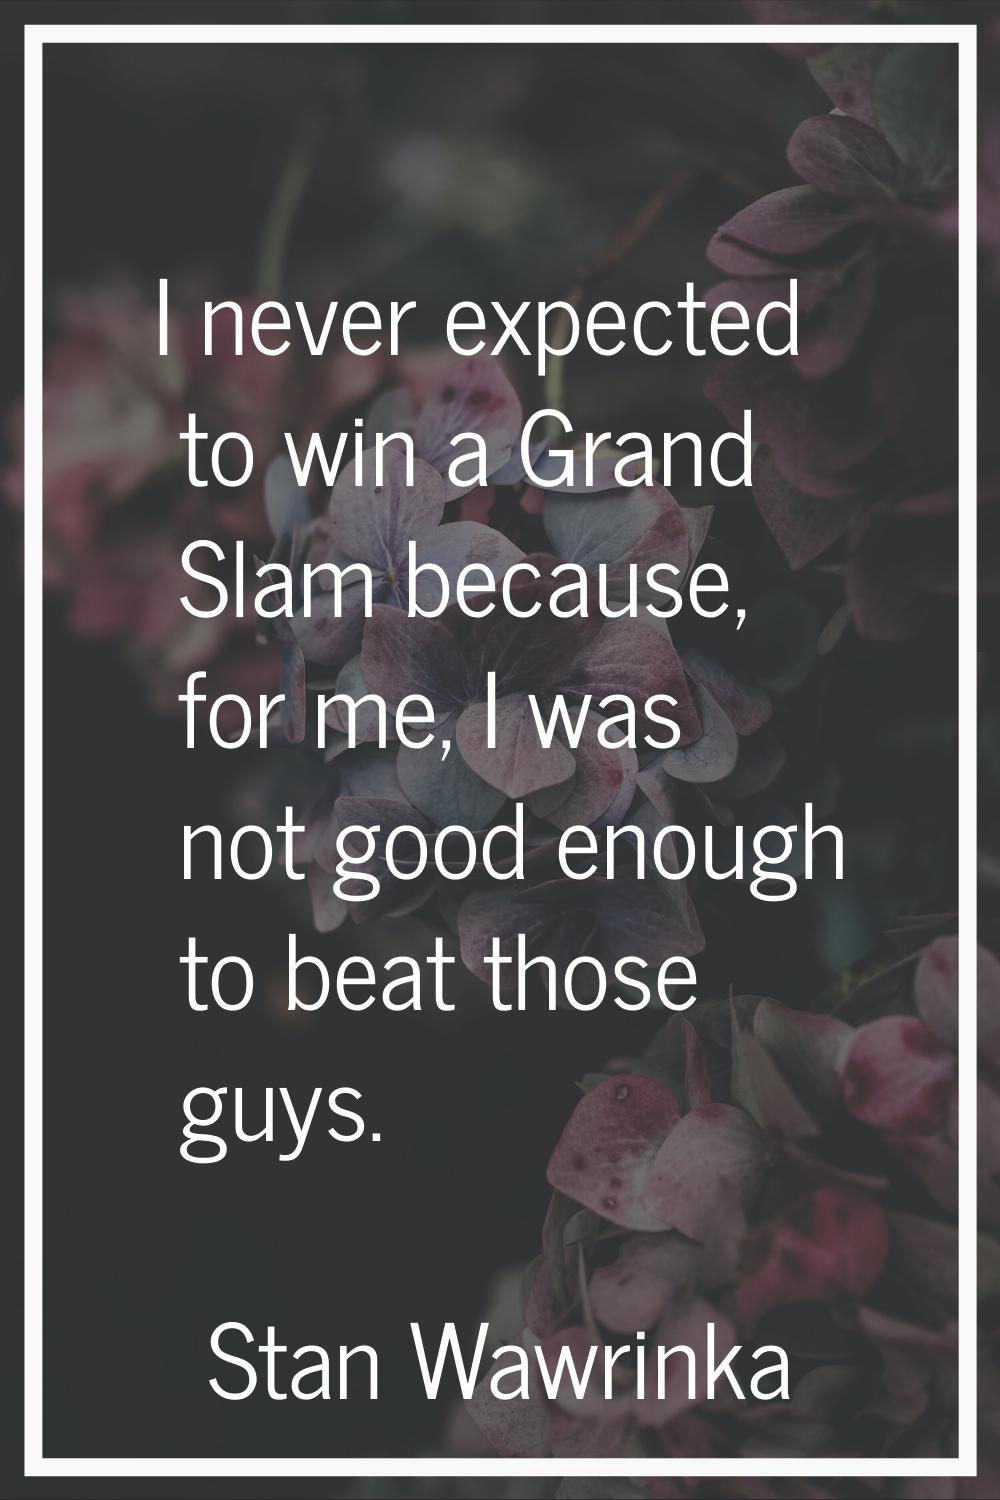 I never expected to win a Grand Slam because, for me, I was not good enough to beat those guys.